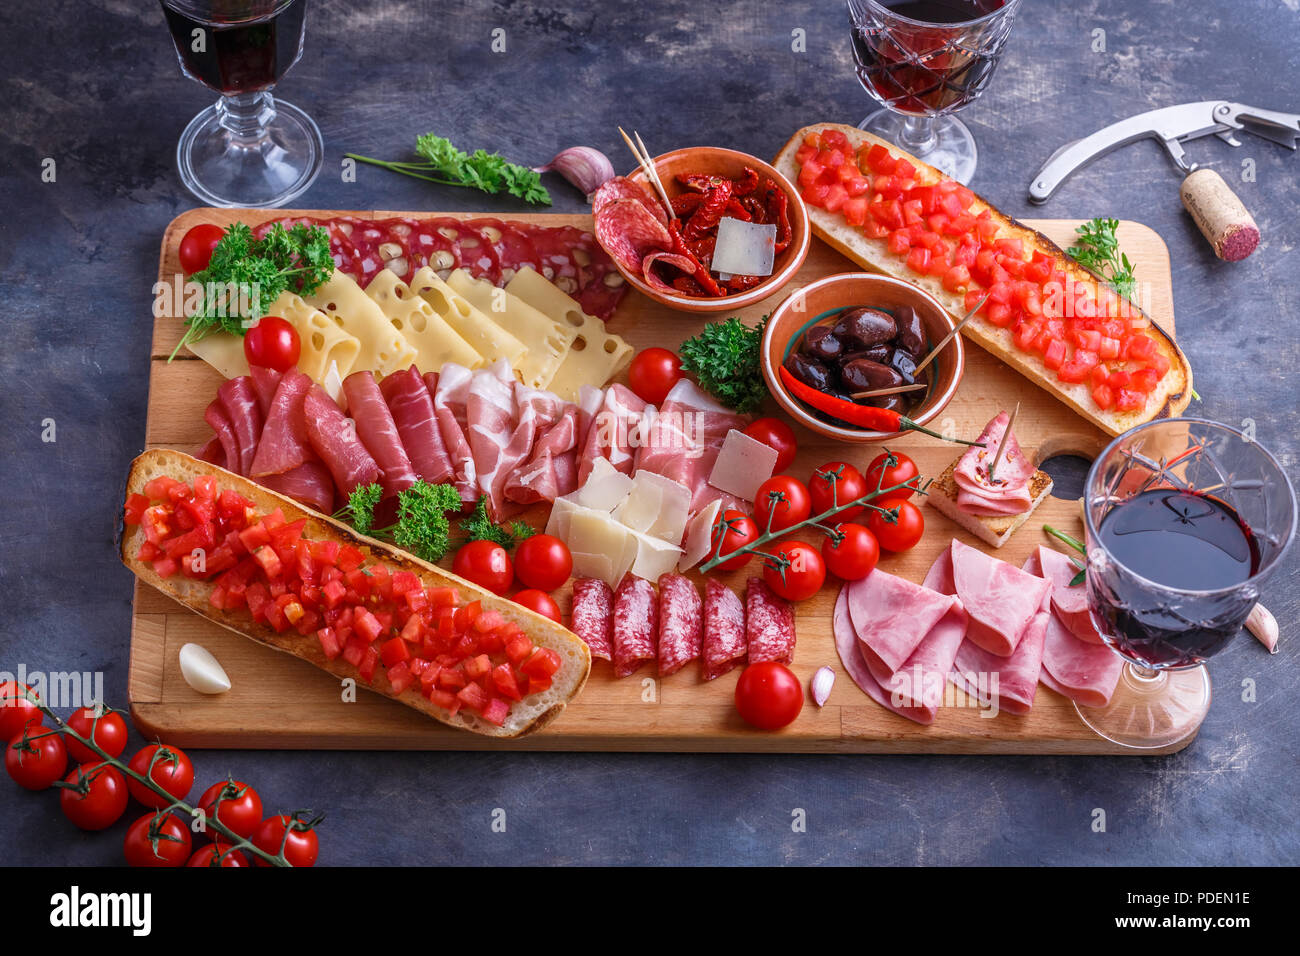 Cutting board of Assorted Cured Meats, Cheese, bread and wine Stock Photo